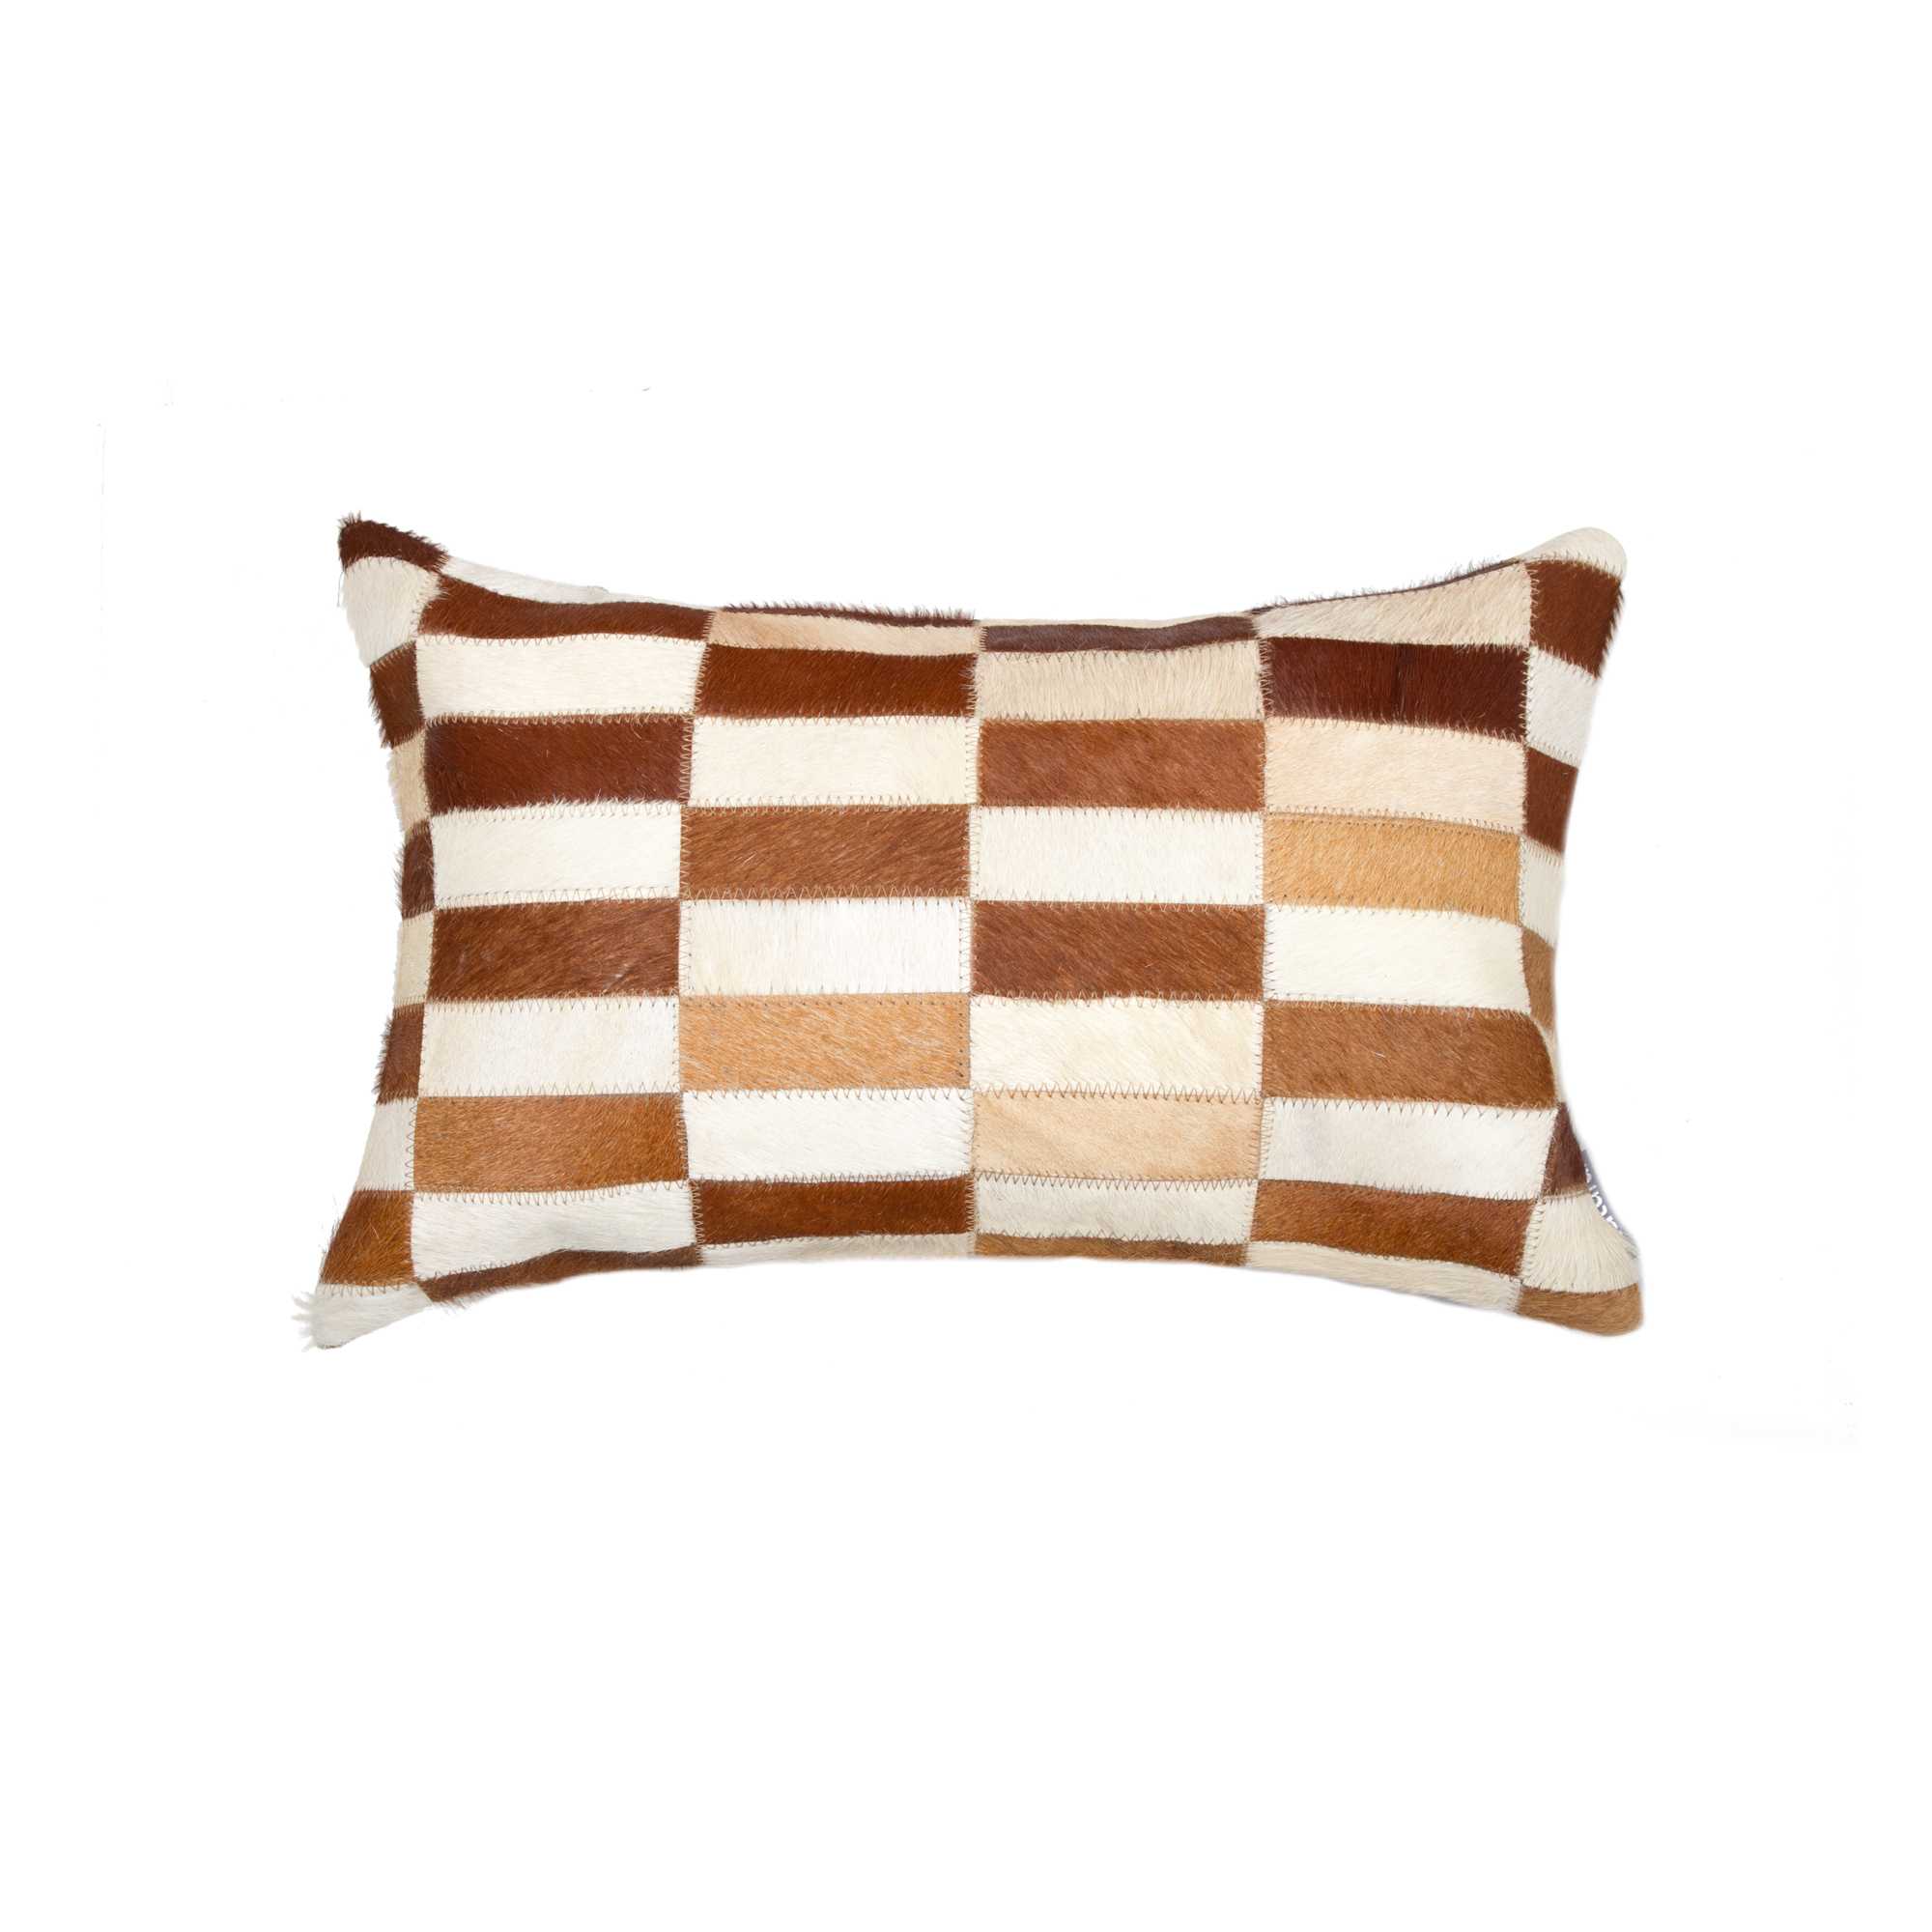 12" x 20" x 5" Brown And White Linear Cowhide - Pillow